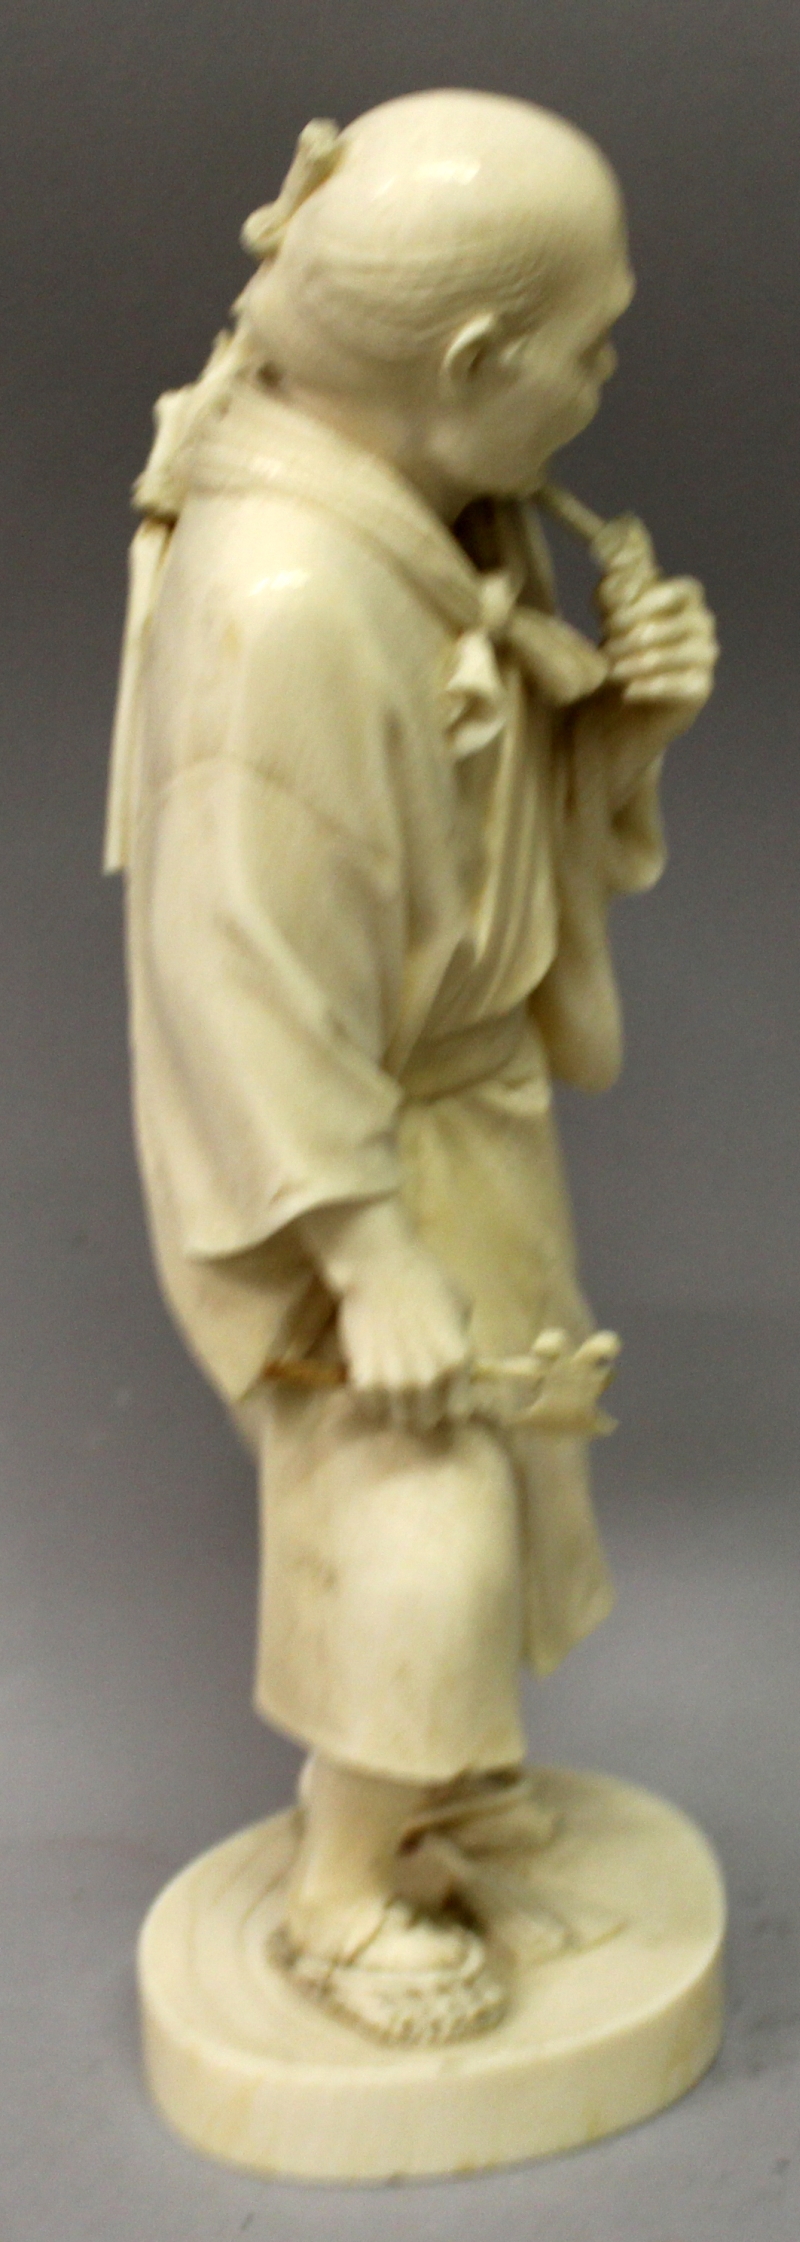 A LARGE GOOD QUALITY JAPANESE MEIJI PERIOD TOKYO SCHOOL IVORY OKIMONO OF A STANDING MAN, holding - Image 2 of 8